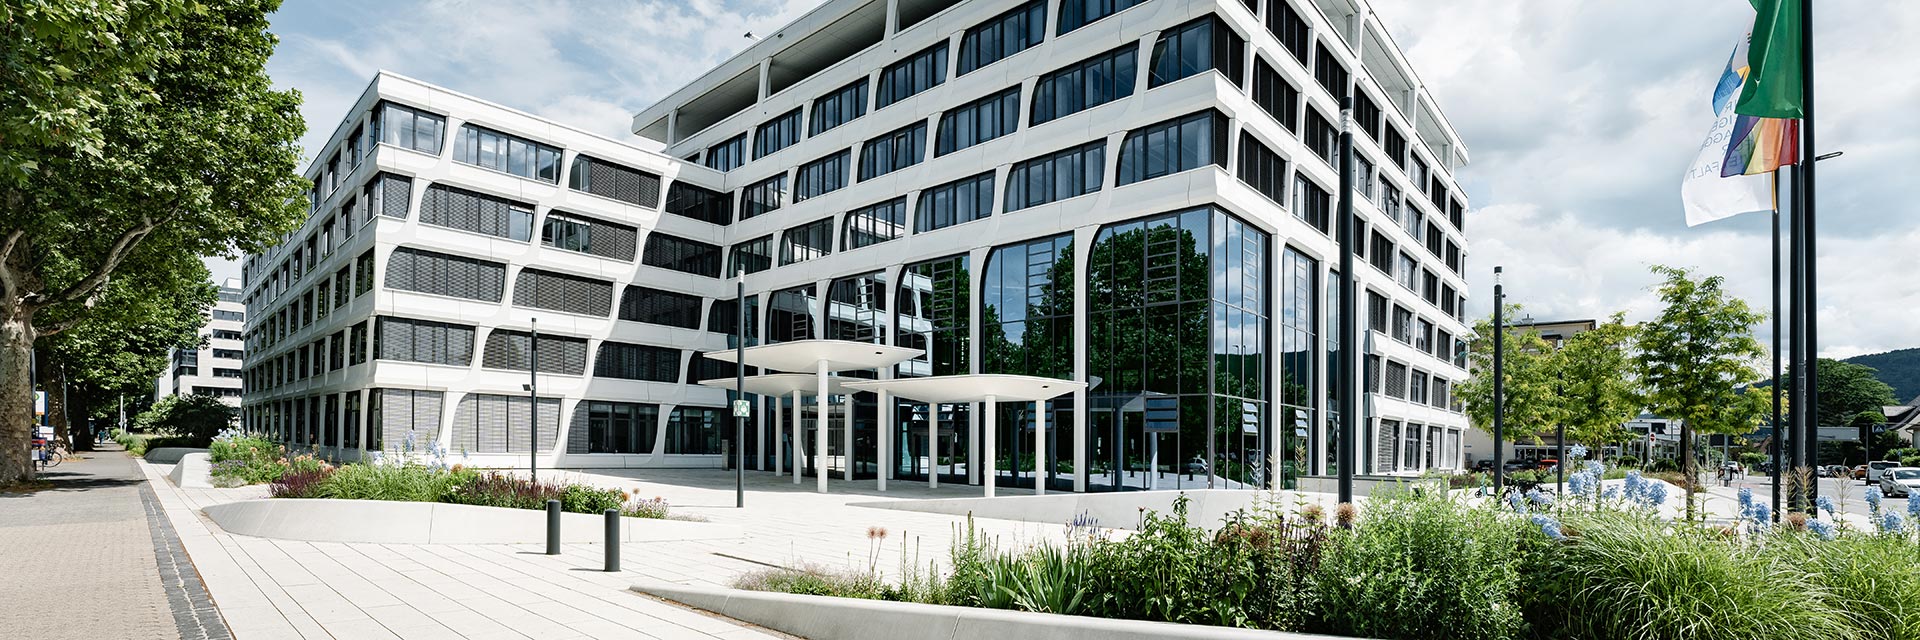 Headquarters of Heidelberg Materials: white building with many windows